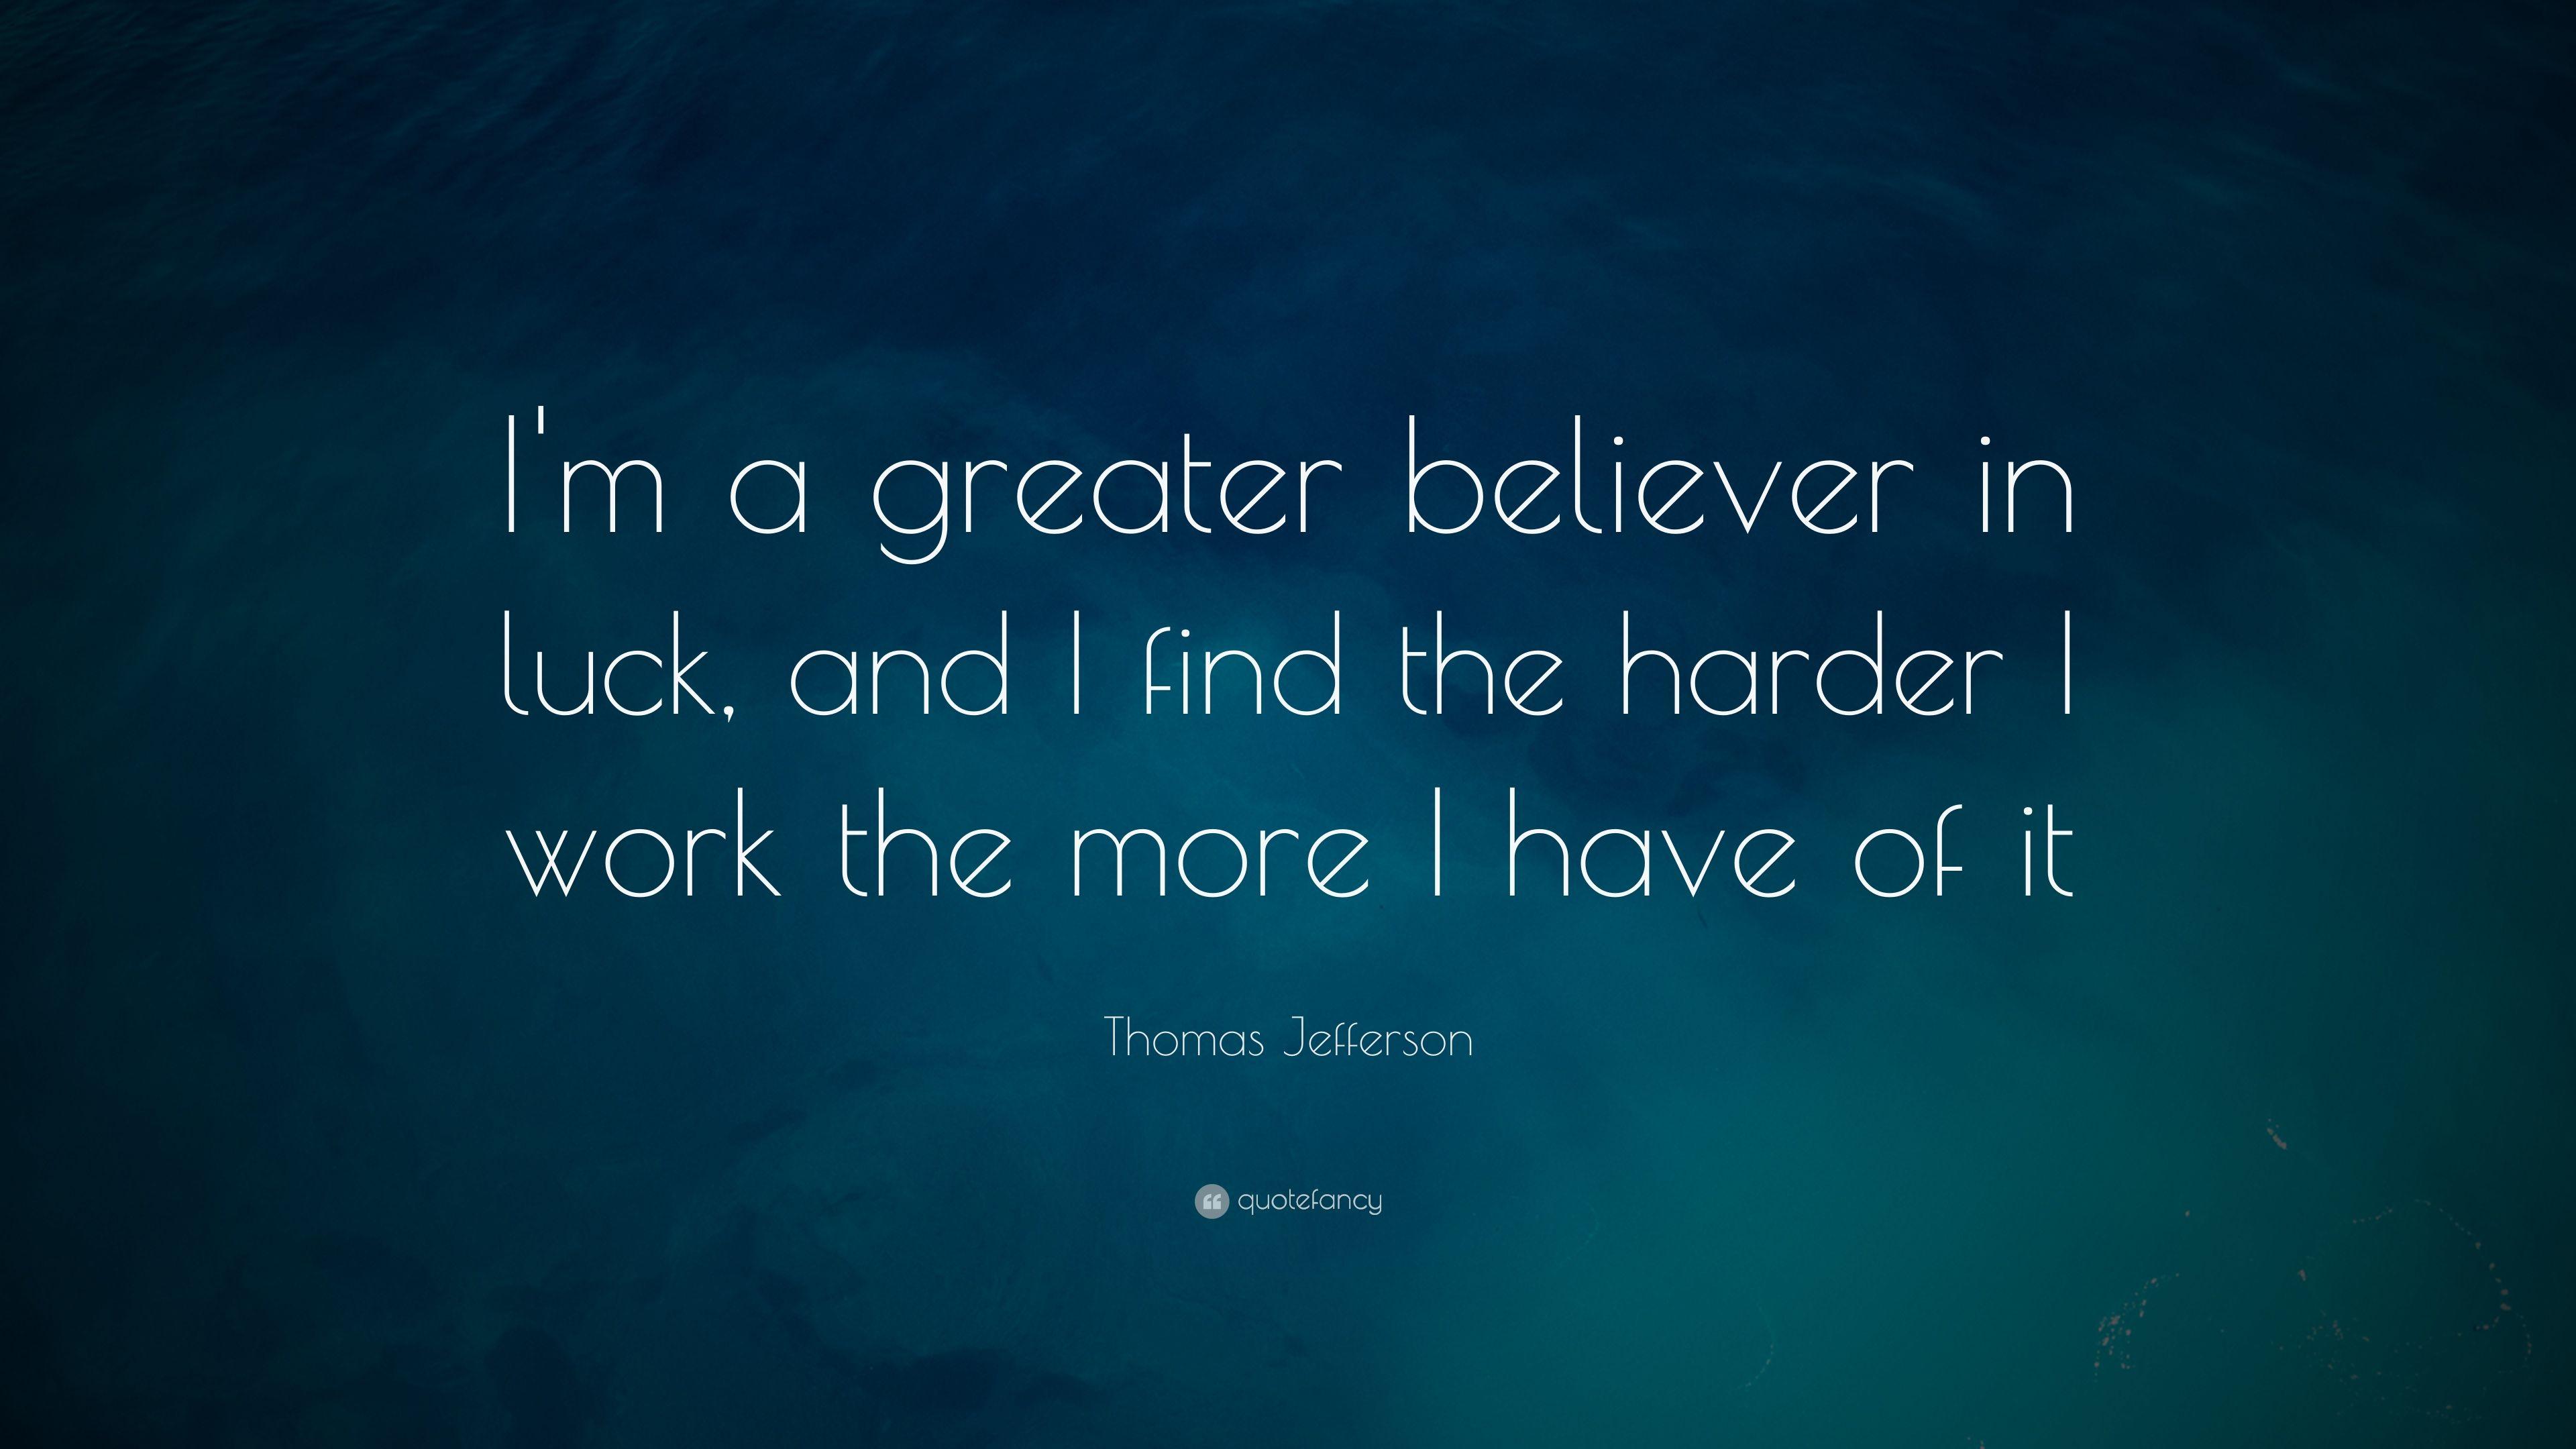 Thomas Jefferson Quote: “I'm a greater believer in luck, and I find